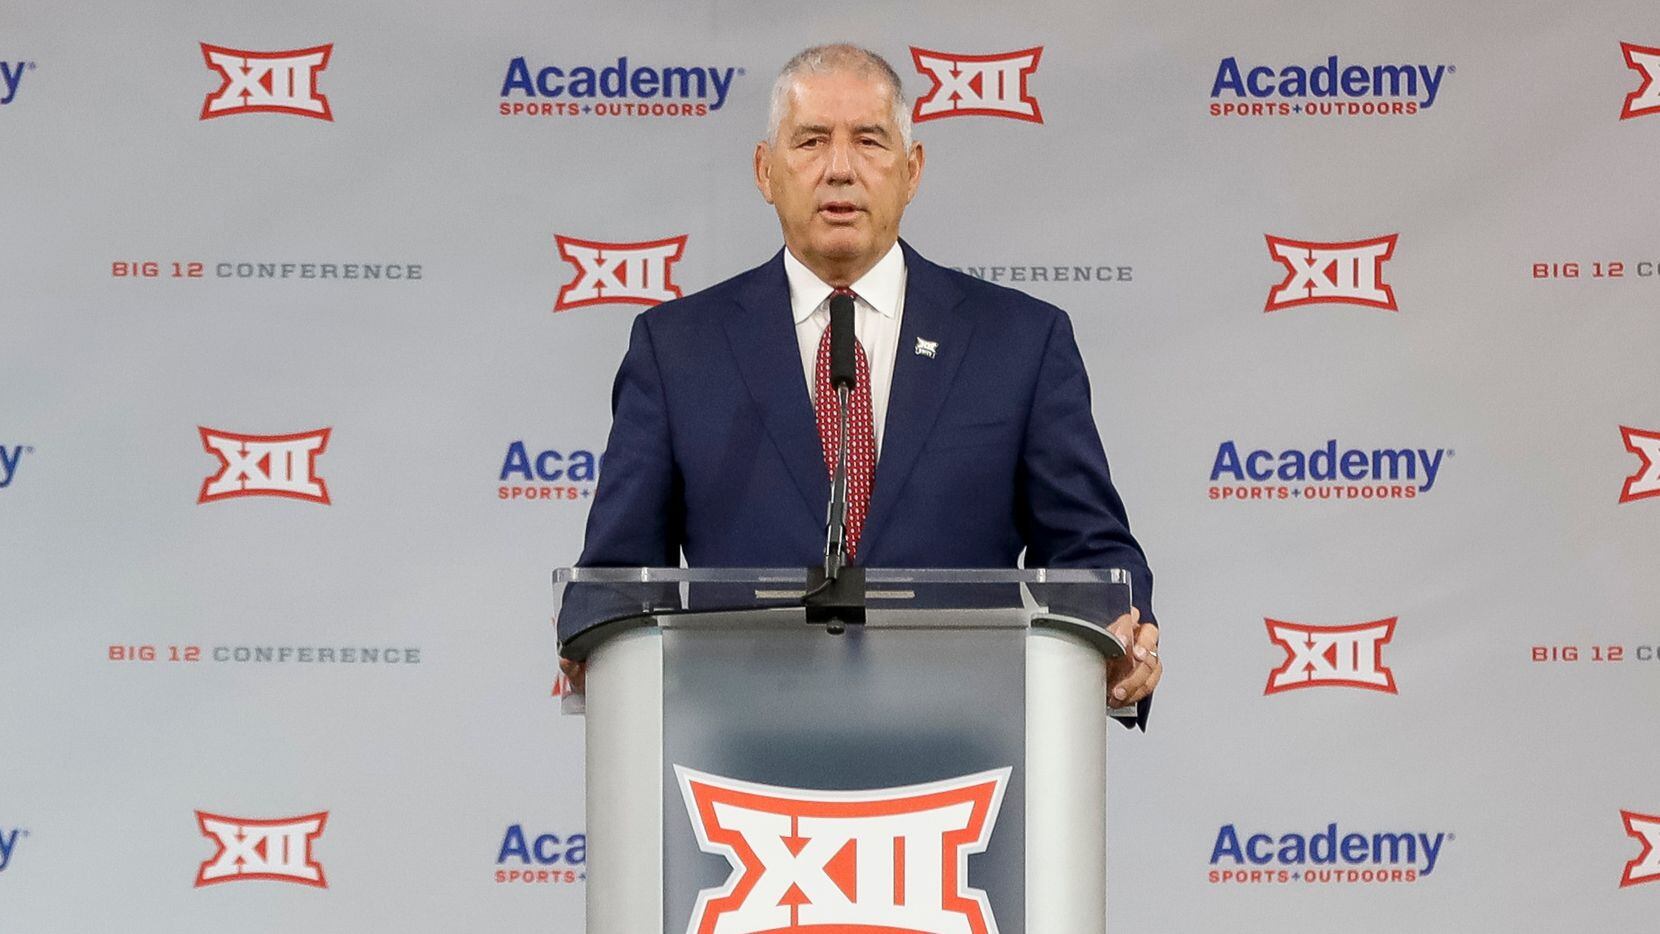 Big 12 Conference commissioner Bob Bowlsby speaks during the Big 12 Conference Media Days at AT&T Stadium on Wednesday, July 14, 2021, in Arlington.